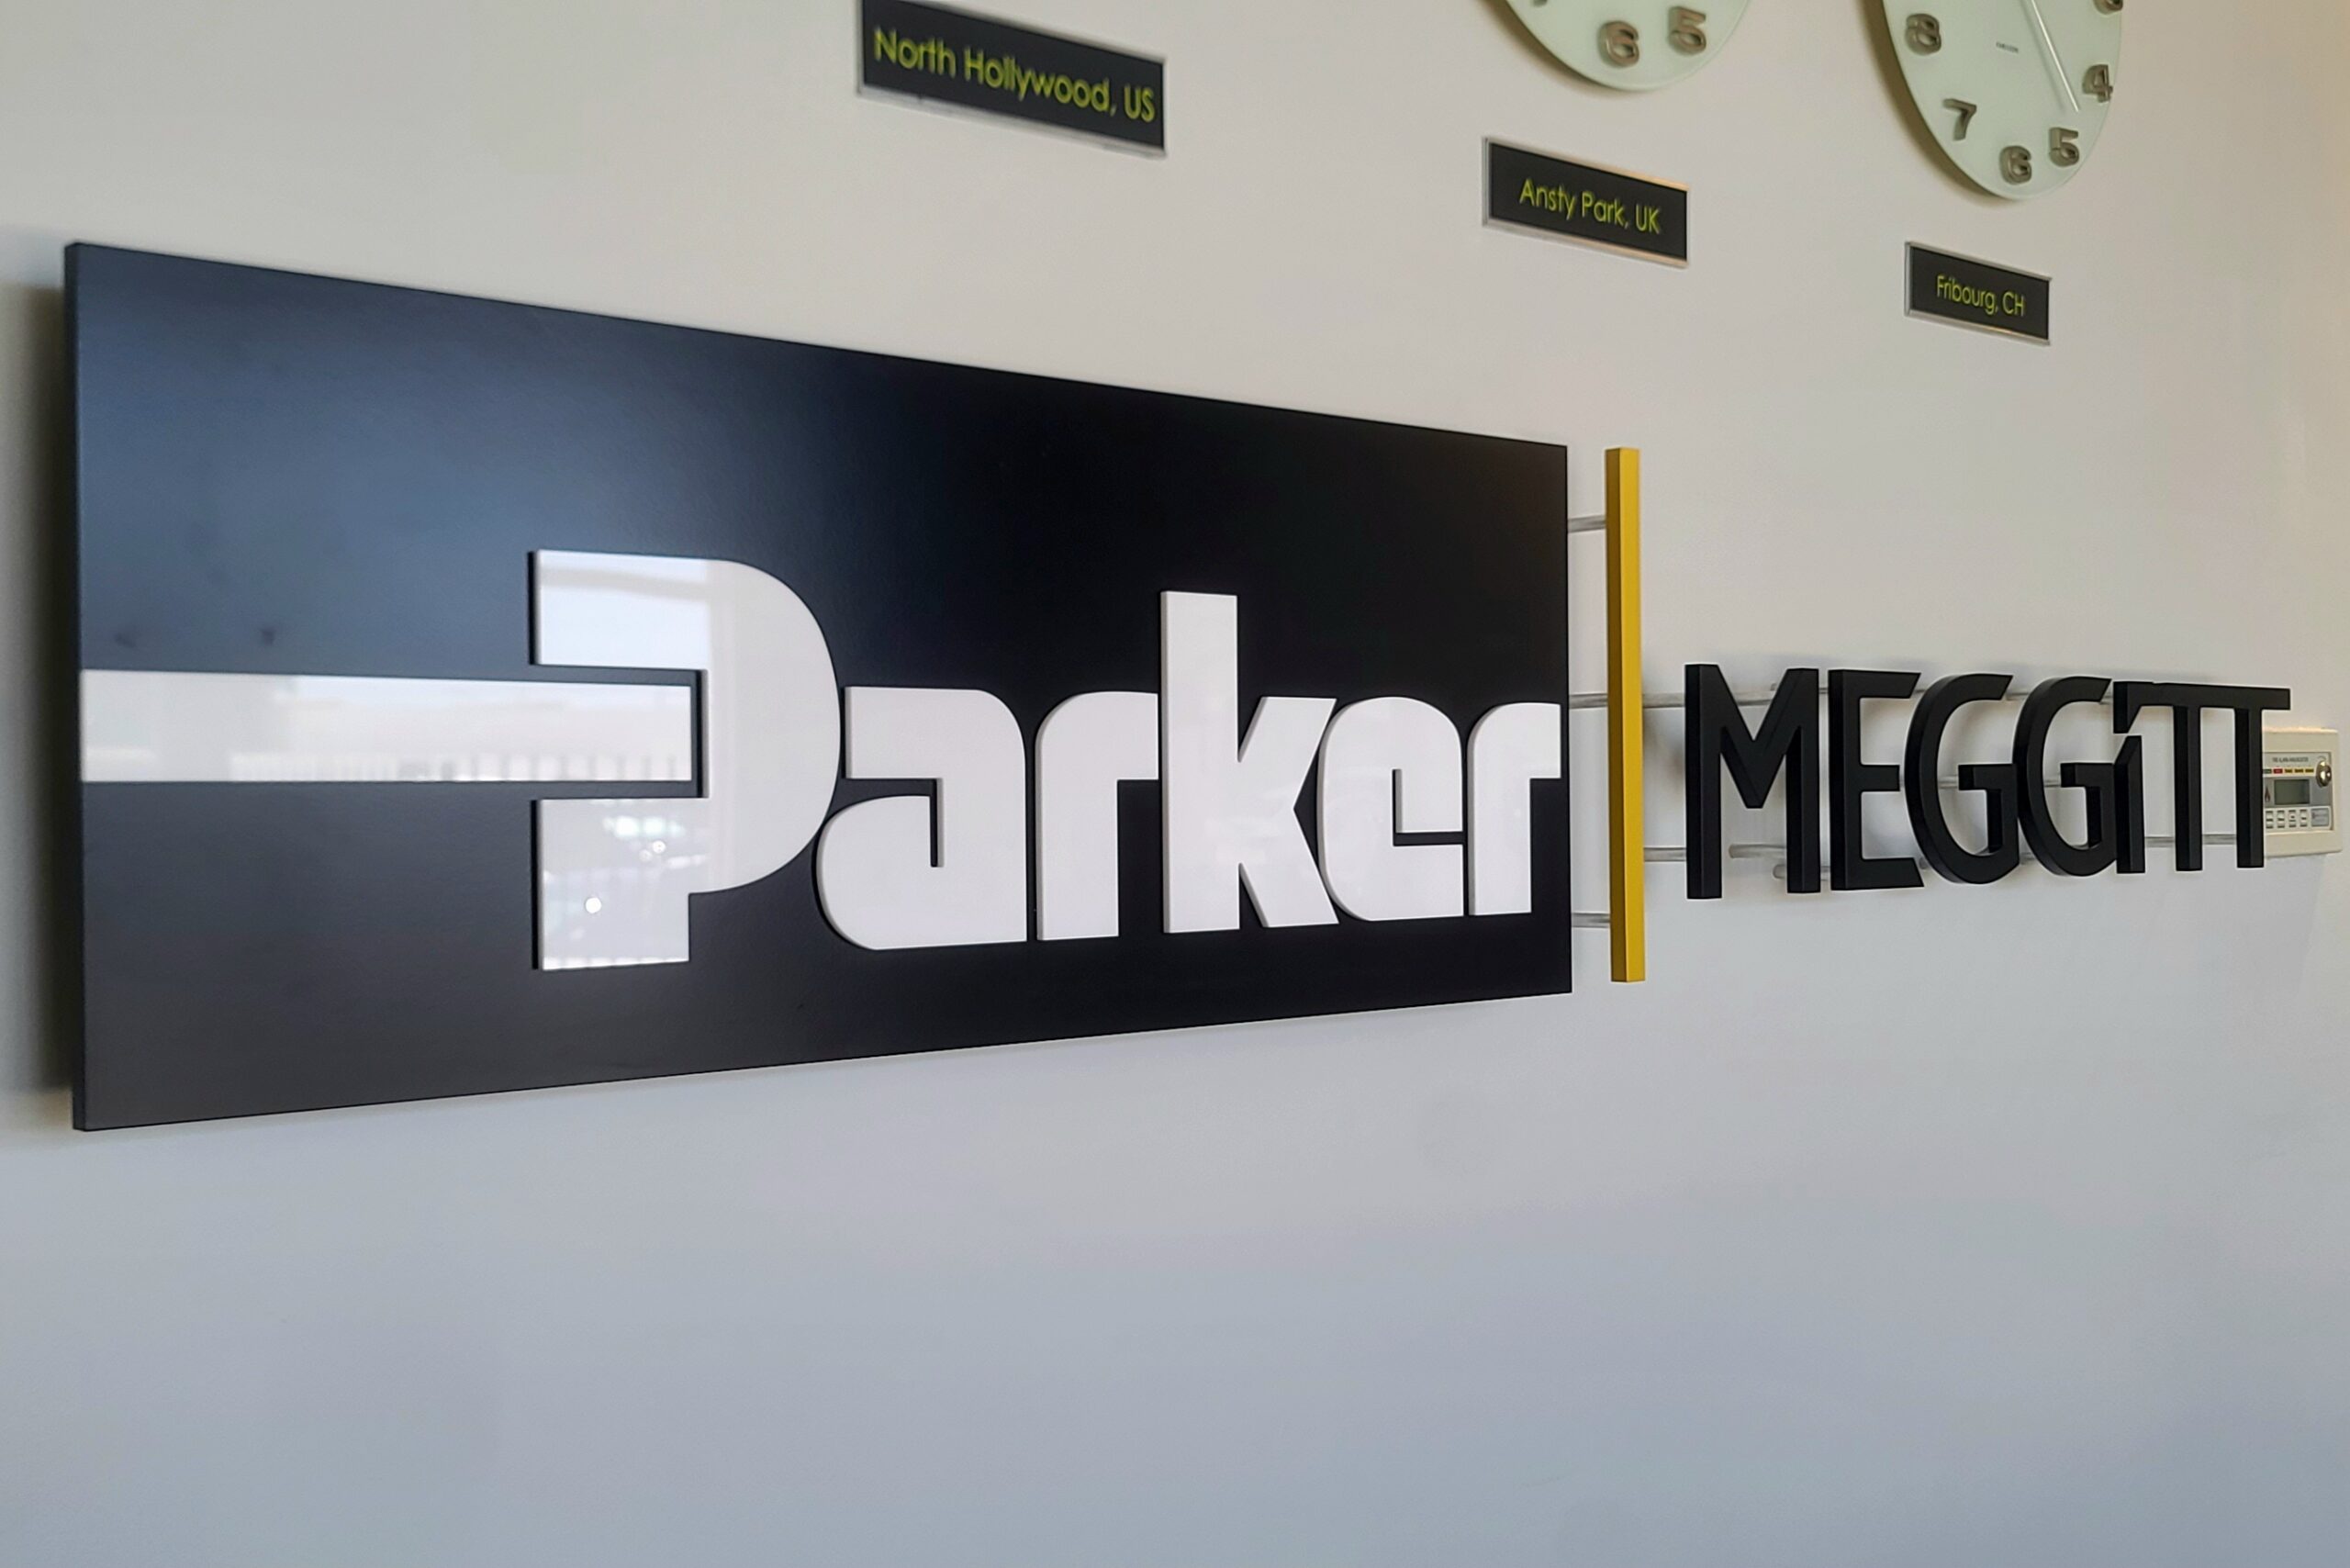 You are currently viewing Parker Meggitt Lobby Sign North Hollywood Los Angeles